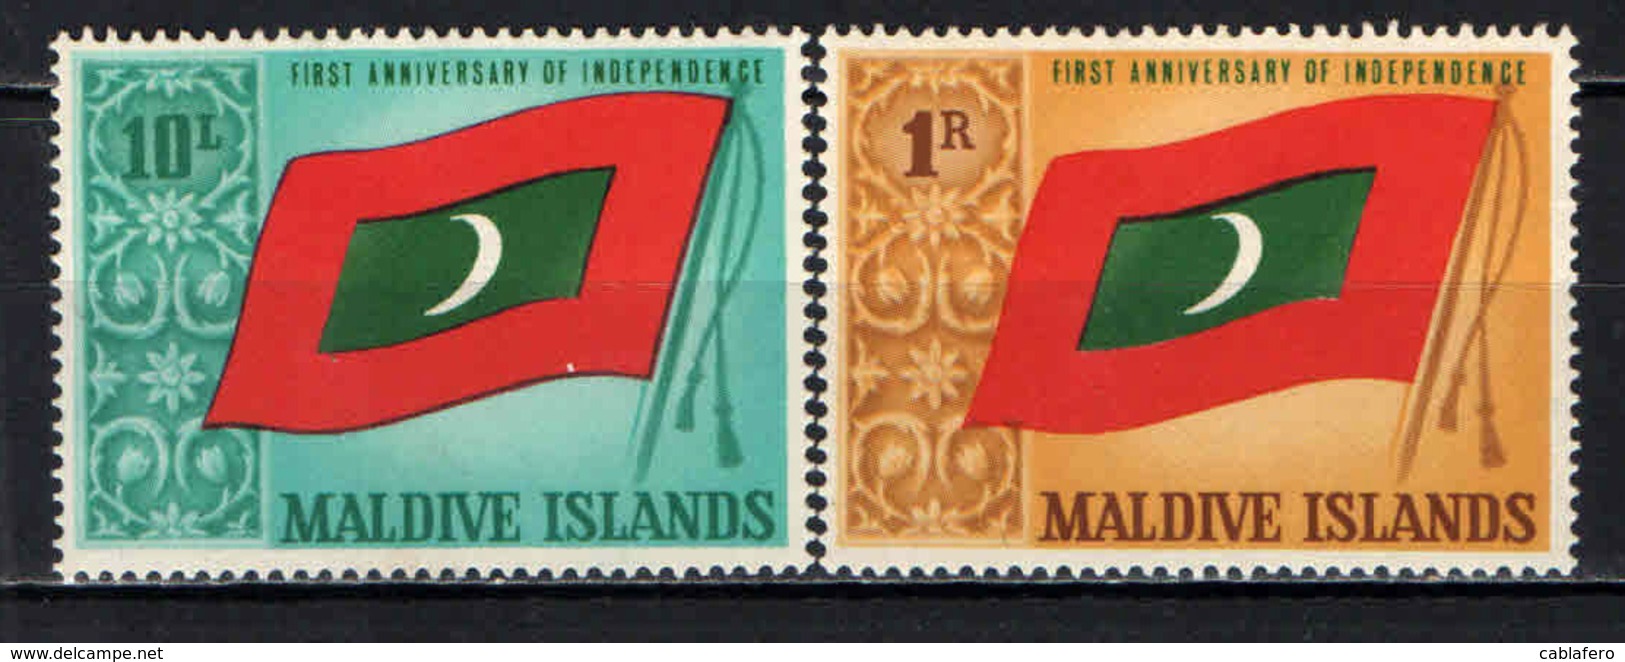 MALDIVE - 1966 - 1st Anniv. Of Full Independence From Great Britain - MNH - Maldives (1965-...)